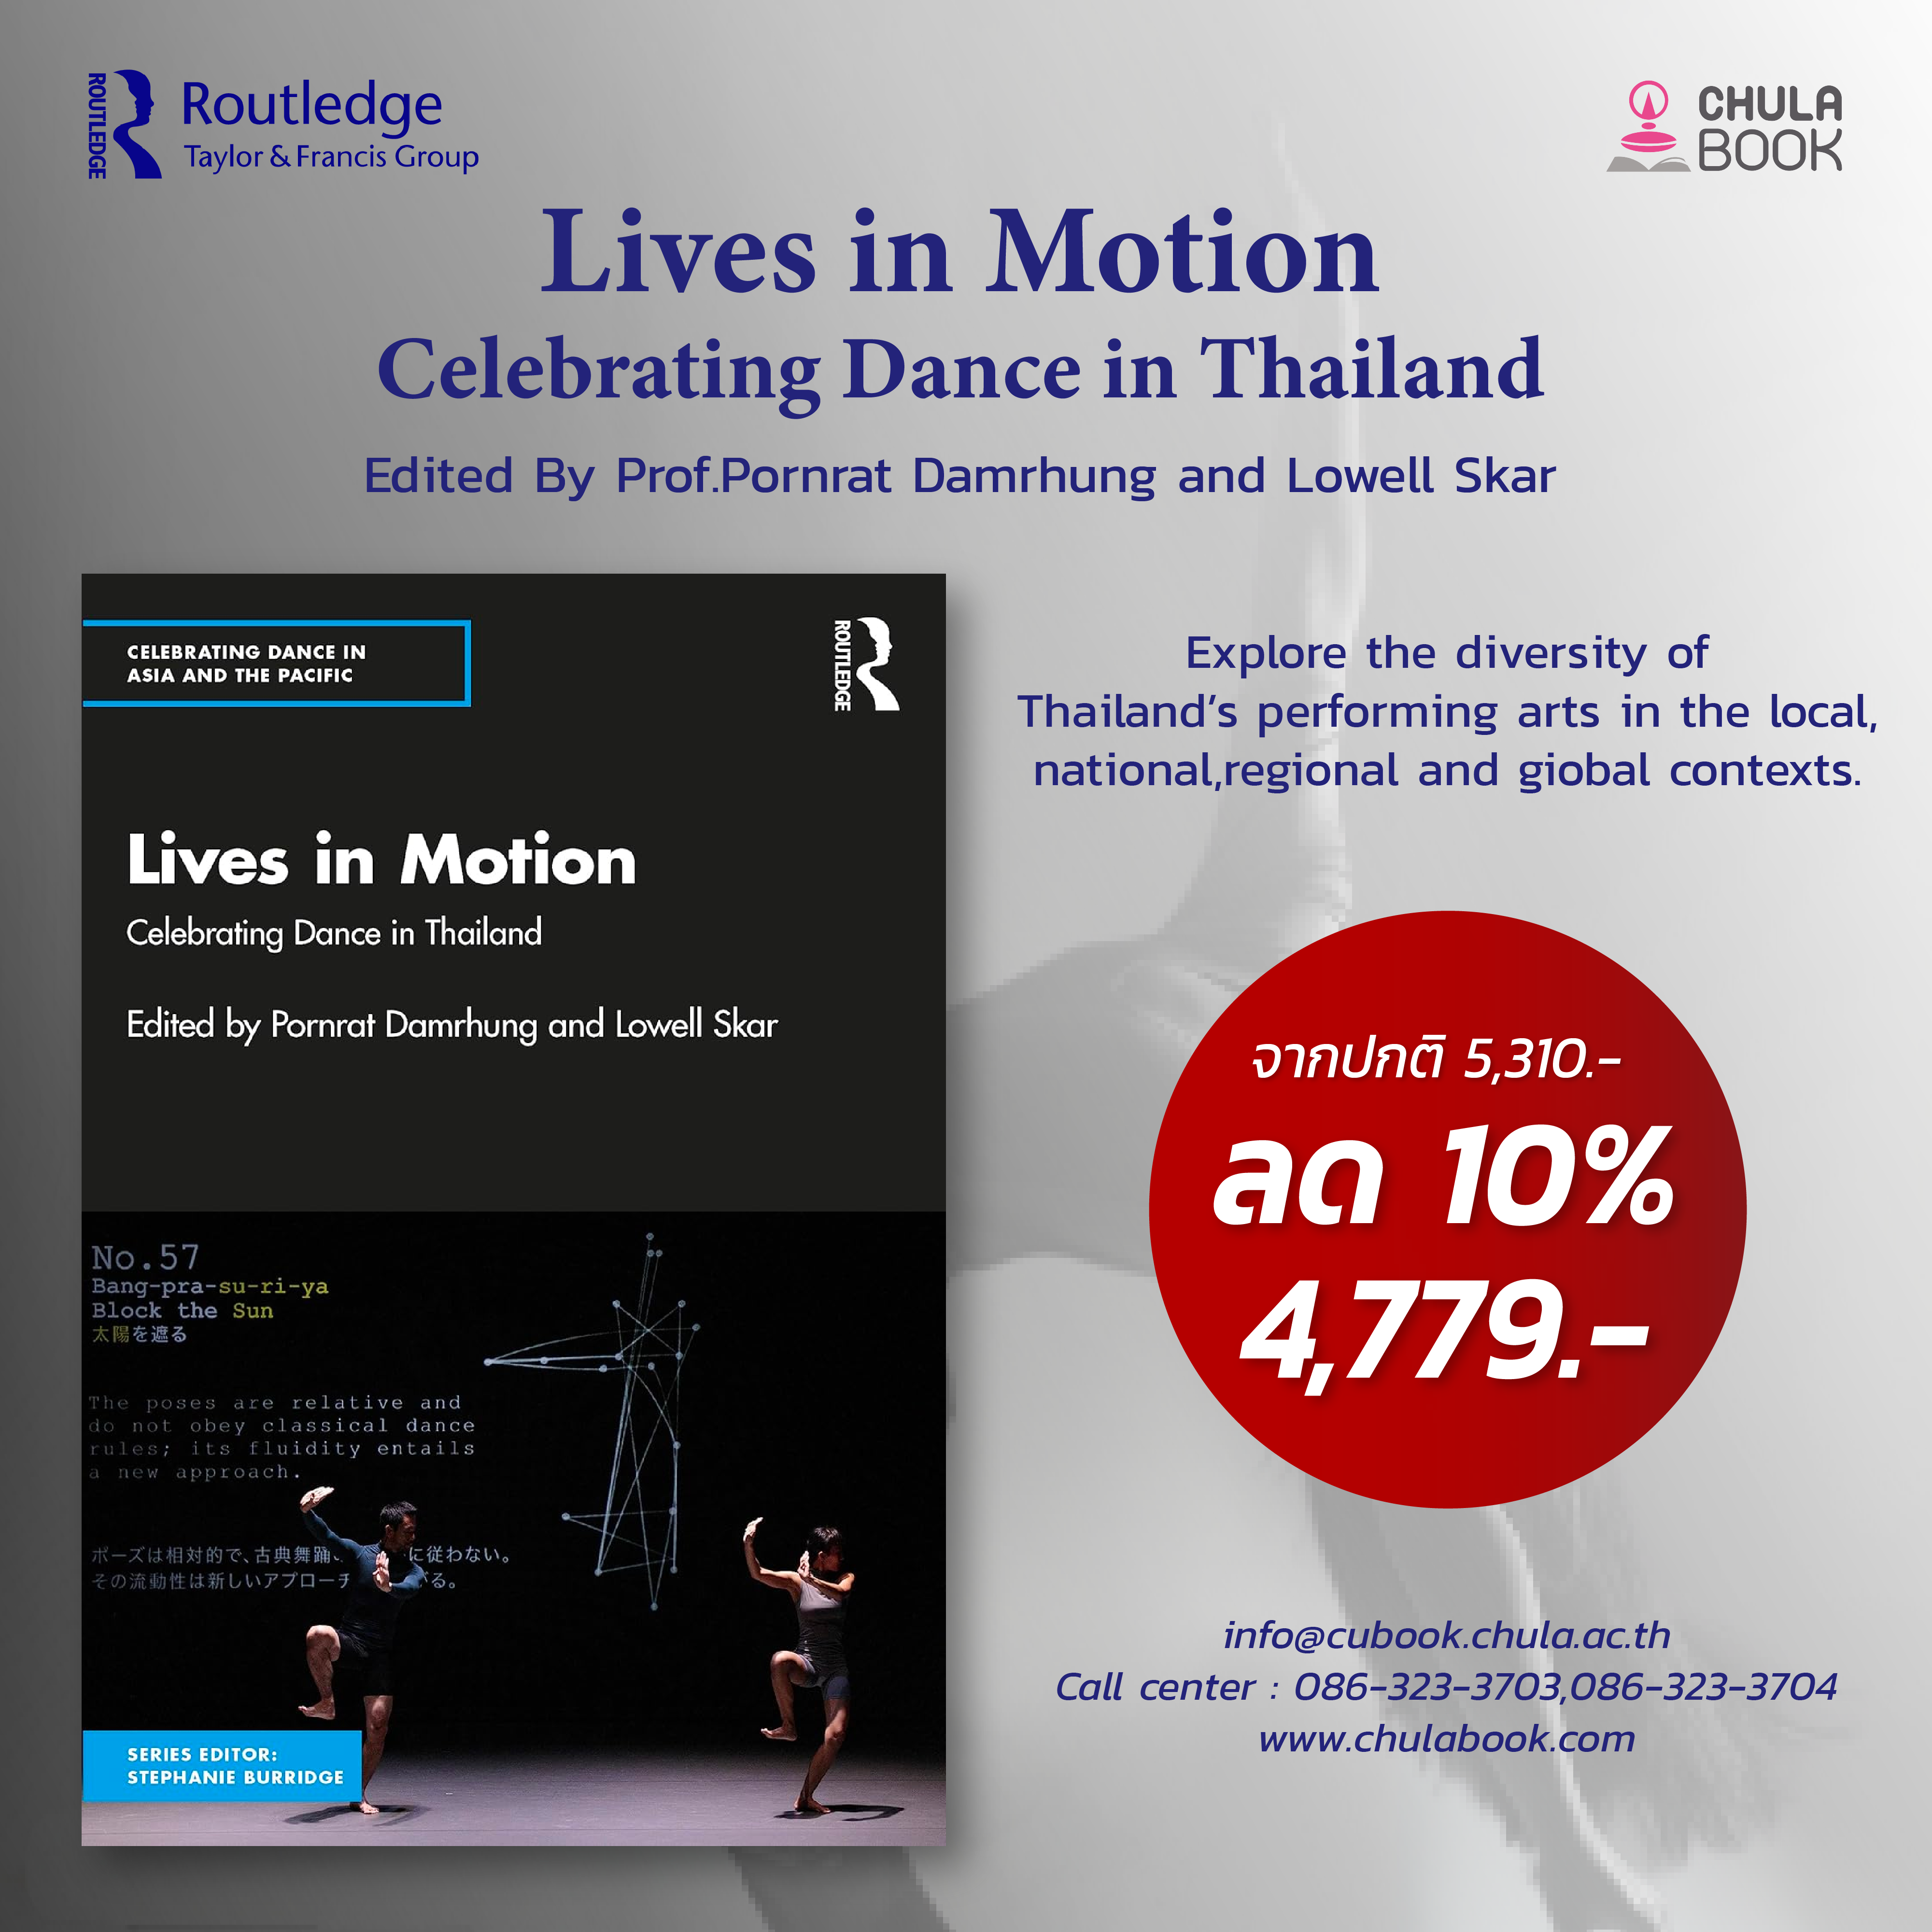 LIVES IN MOTION: CELEBRATING DANCE IN THAILAND